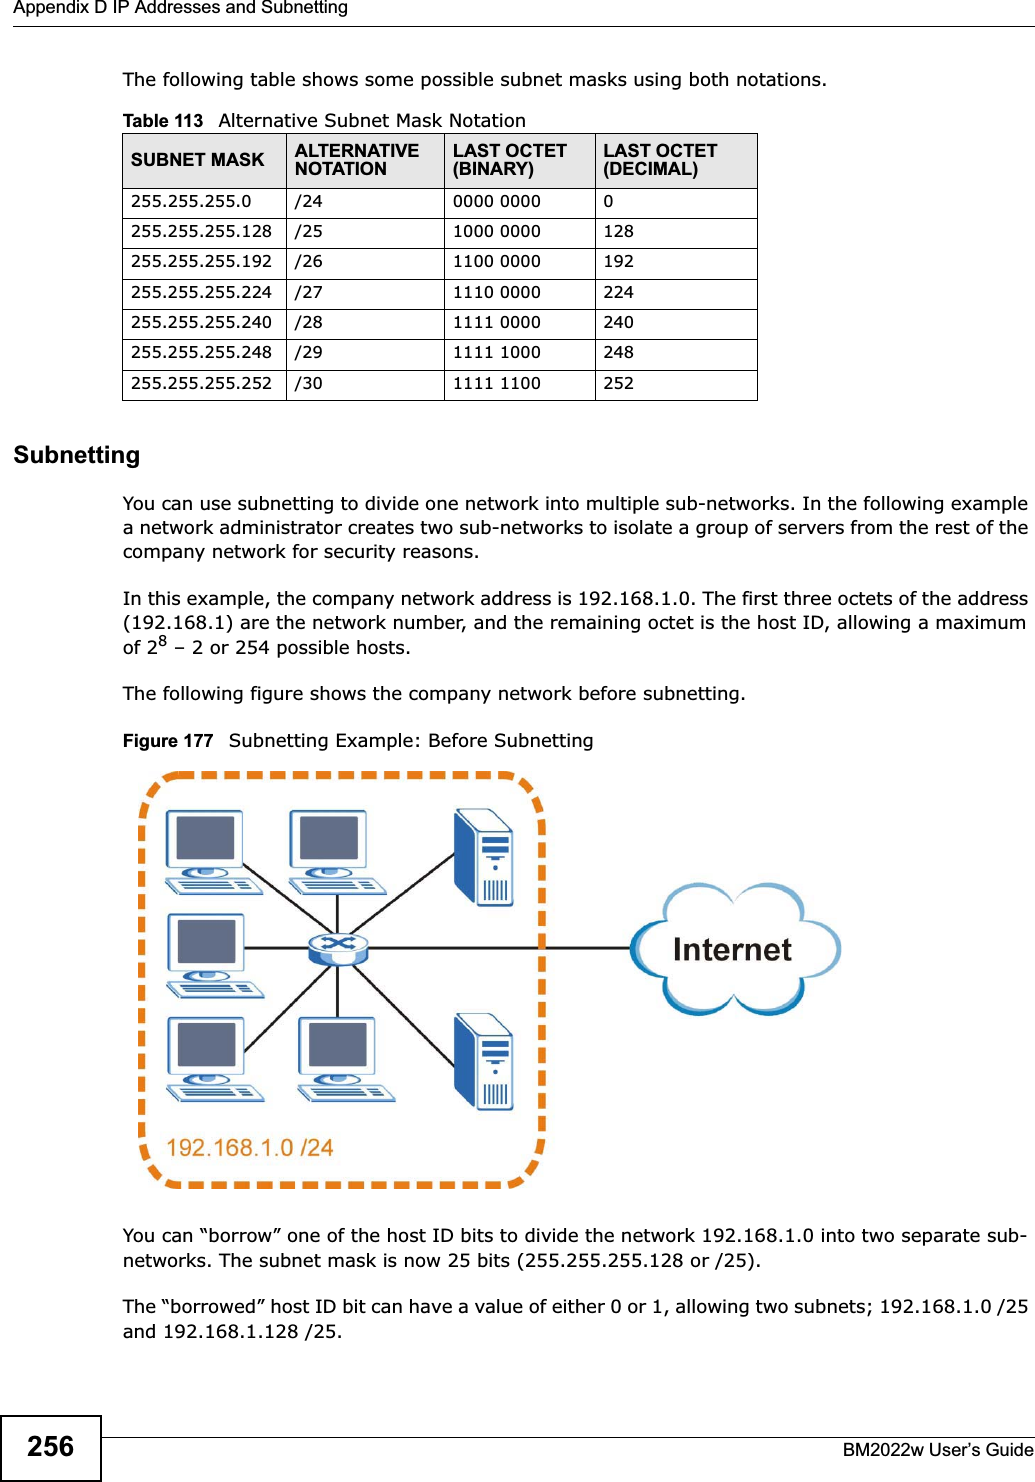 Appendix D IP Addresses and SubnettingBM2022w User’s Guide256The following table shows some possible subnet masks using both notations. SubnettingYou can use subnetting to divide one network into multiple sub-networks. In the following example a network administrator creates two sub-networks to isolate a group of servers from the rest of the company network for security reasons.In this example, the company network address is 192.168.1.0. The first three octets of the address (192.168.1) are the network number, and the remaining octet is the host ID, allowing a maximum of 28 – 2 or 254 possible hosts.The following figure shows the company network before subnetting.  Figure 177   Subnetting Example: Before SubnettingYou can “borrow” one of the host ID bits to divide the network 192.168.1.0 into two separate sub-networks. The subnet mask is now 25 bits (255.255.255.128 or /25).The “borrowed” host ID bit can have a value of either 0 or 1, allowing two subnets; 192.168.1.0 /25 and 192.168.1.128 /25. Table 113   Alternative Subnet Mask NotationSUBNET MASK ALTERNATIVE NOTATIONLAST OCTET (BINARY)LAST OCTET (DECIMAL)255.255.255.0 /24 0000 0000 0255.255.255.128 /25 1000 0000 128255.255.255.192 /26 1100 0000 192255.255.255.224 /27 1110 0000 224255.255.255.240 /28 1111 0000 240255.255.255.248 /29 1111 1000 248255.255.255.252 /30 1111 1100 252